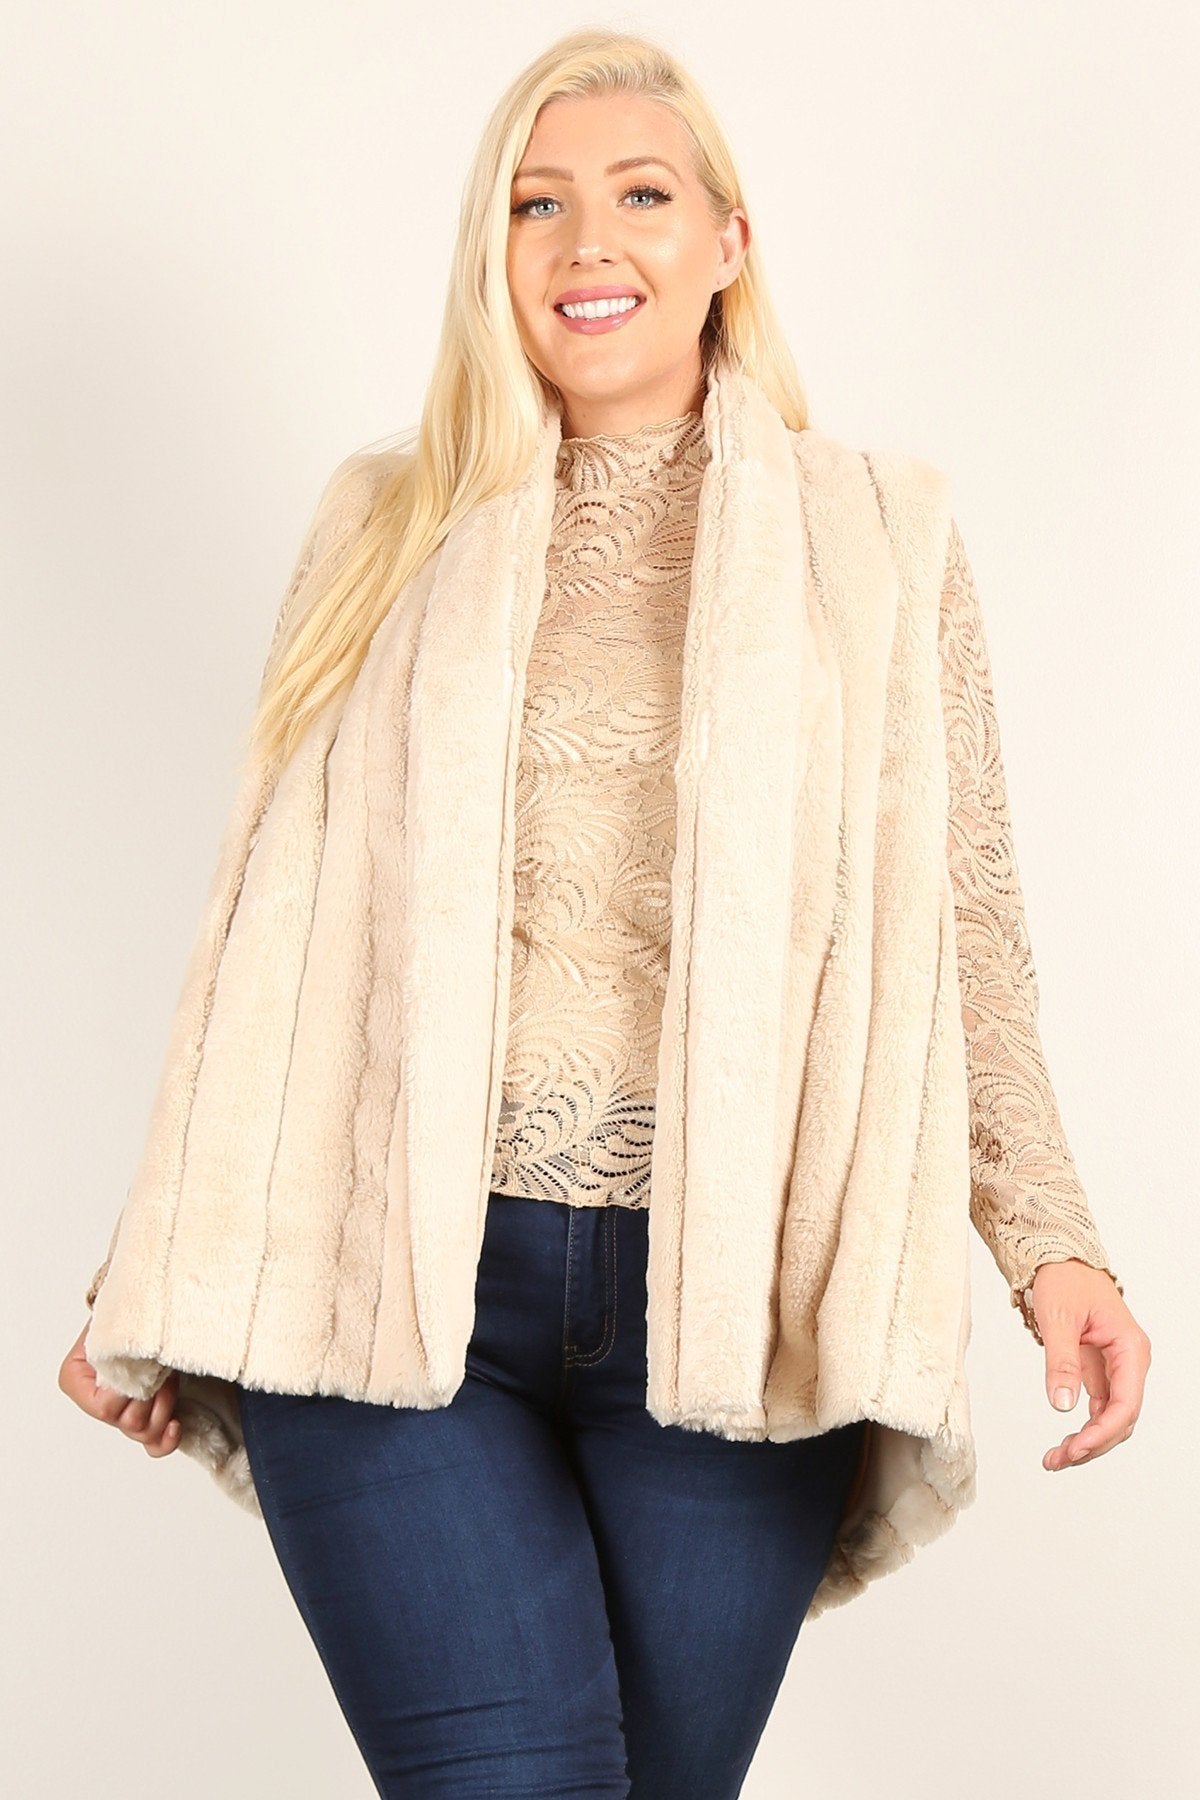 Faux Fur Vest Jacket With Open Front And Pockets